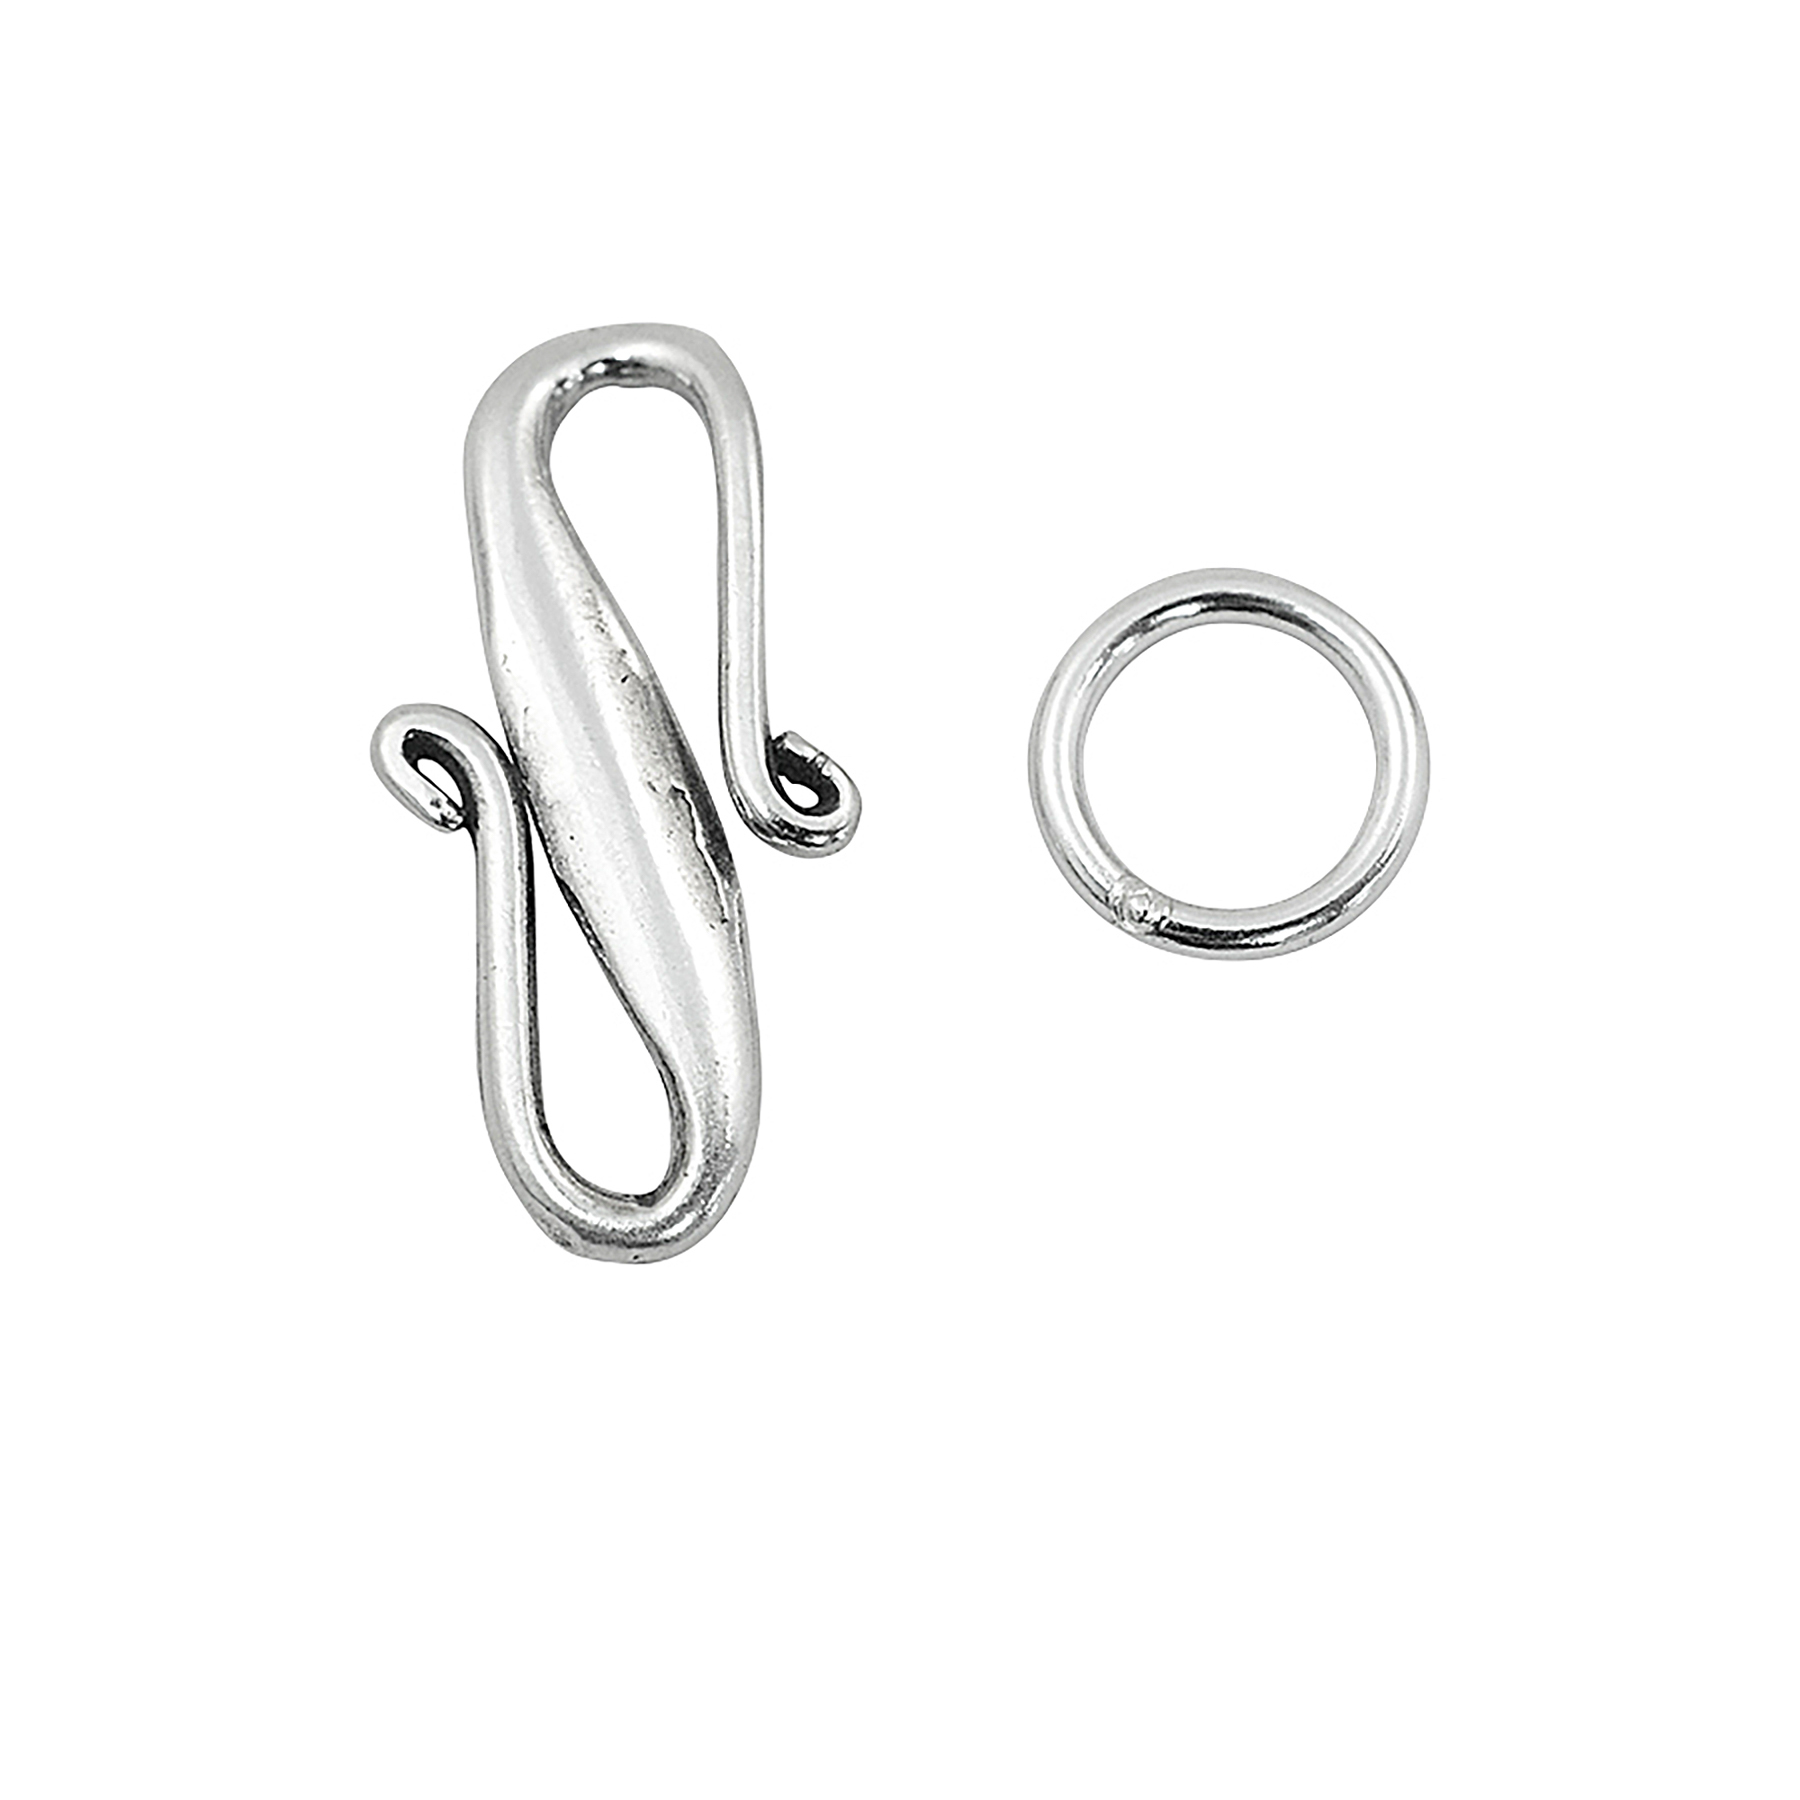 How to Solder a Sterling Silver S hook and Jump Rings (2) 